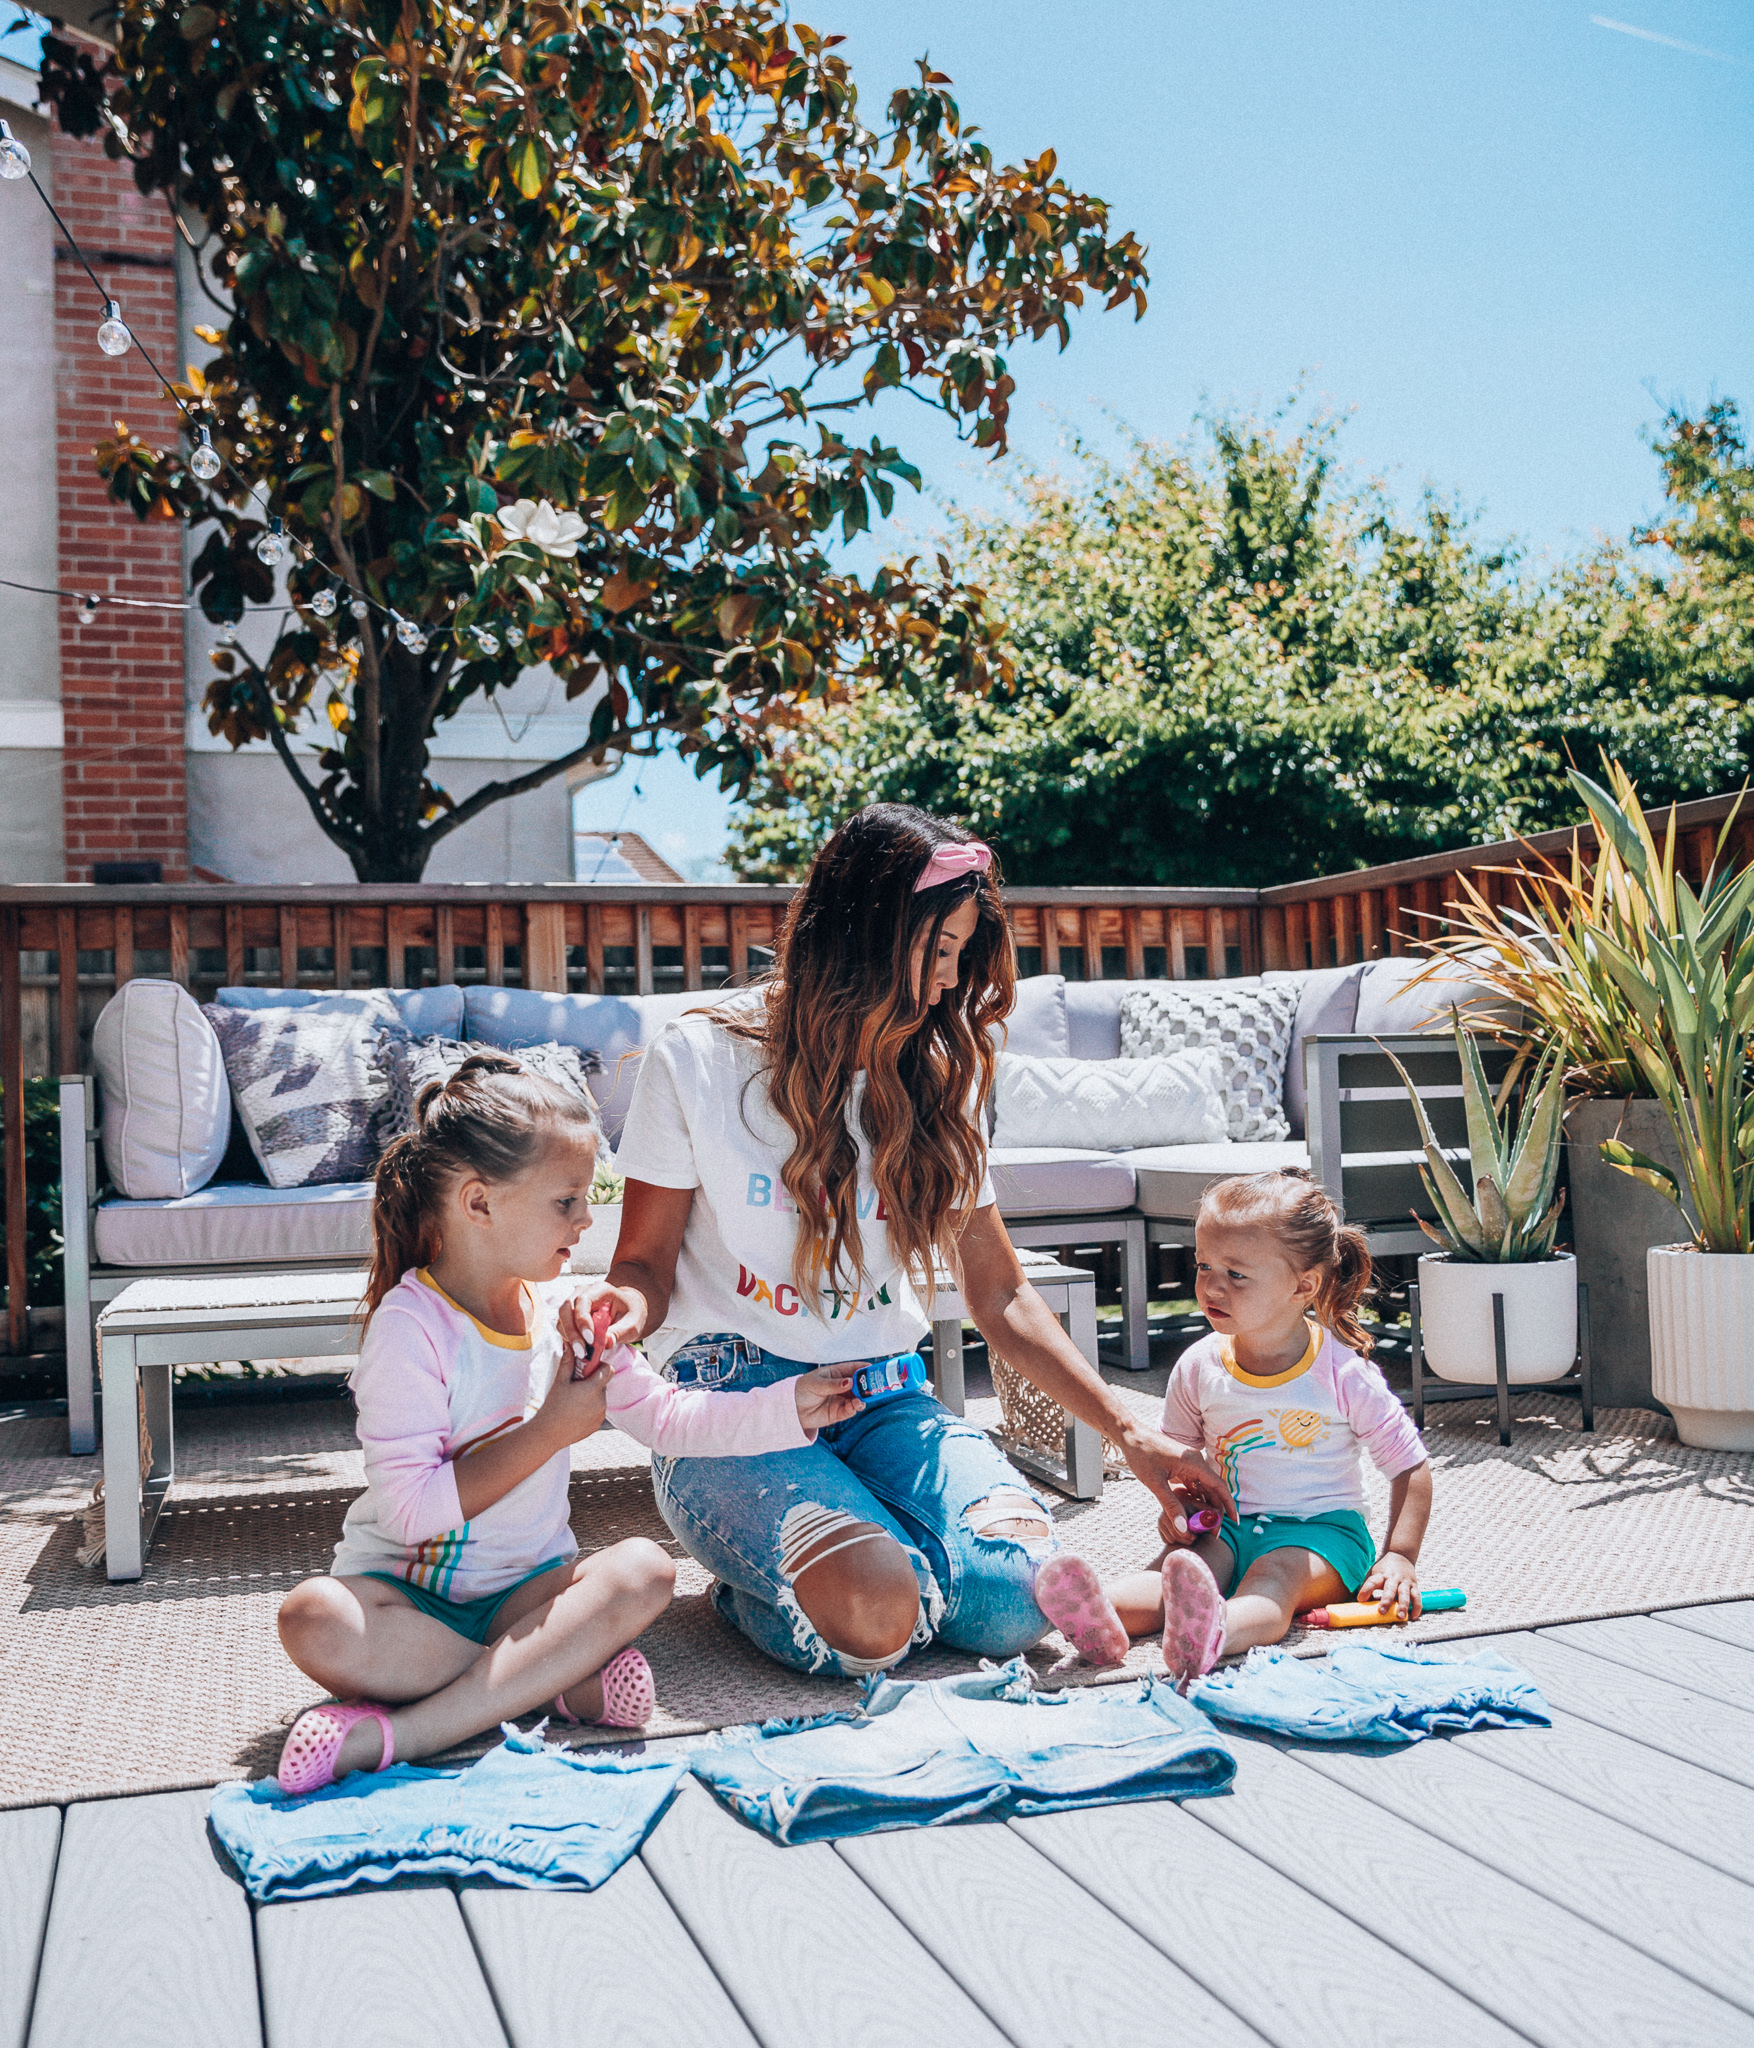 The Girl in the Yellow Dress | Latisha Springer | Fun Summer Activities for Kids by top US mom blog, The Girl in the Yellow Dress: image of mom with young girls sitting on back porch decorating cutoff denim shorts with puff paint.